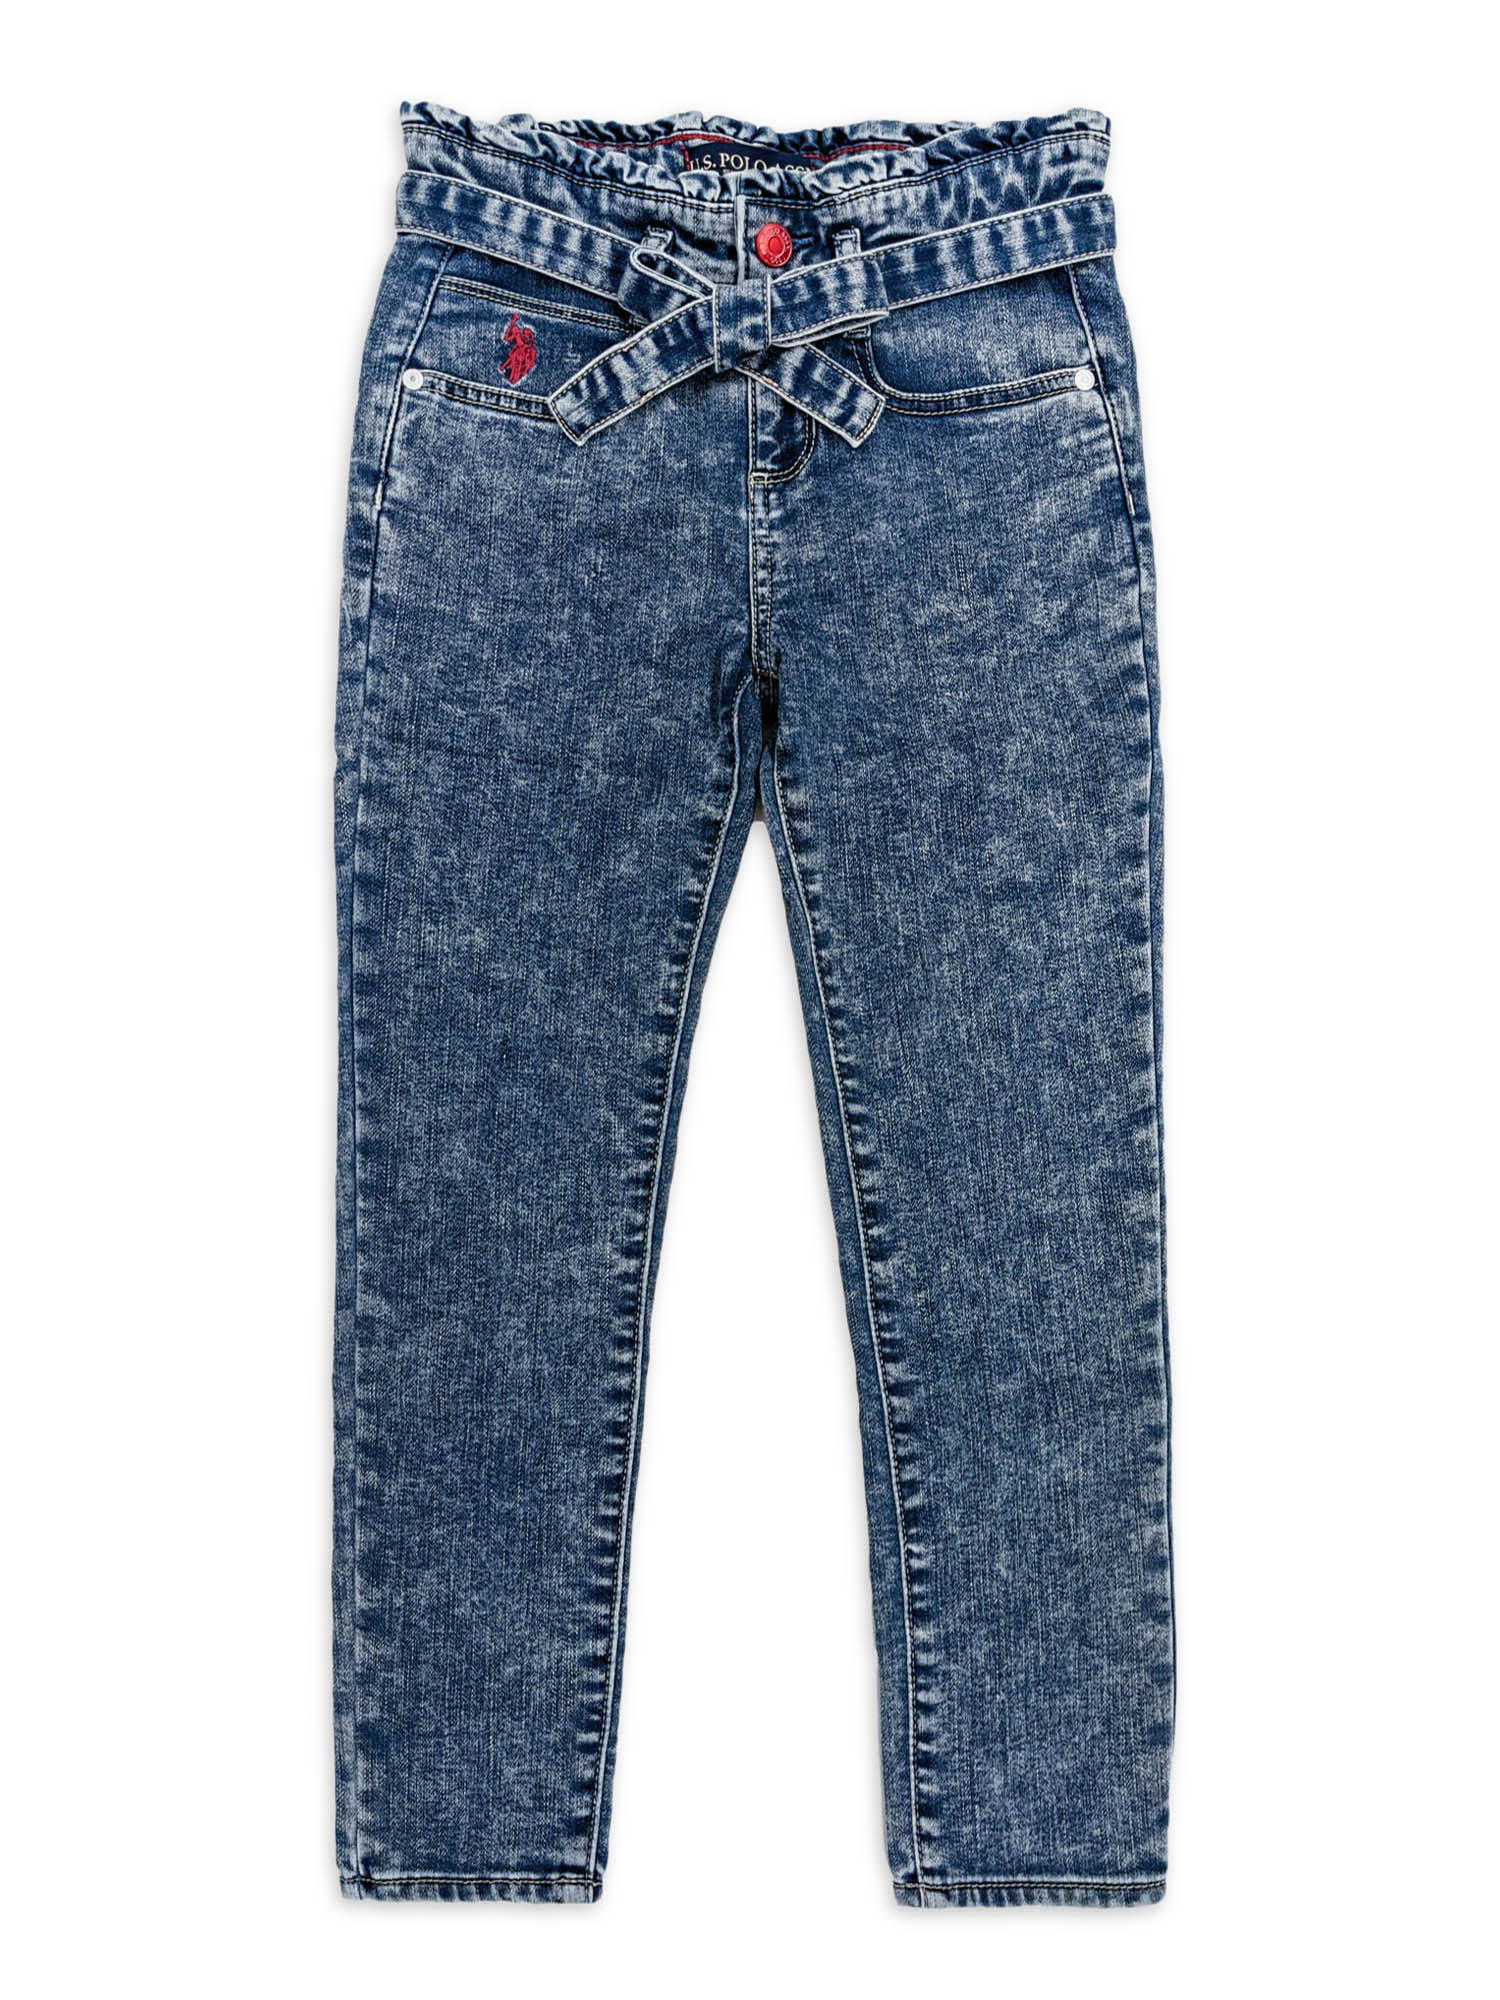 Us Polo Assn. Girls Paperbag Waist Skinny Jeans, Sizes 4-18 - image 1 of 2